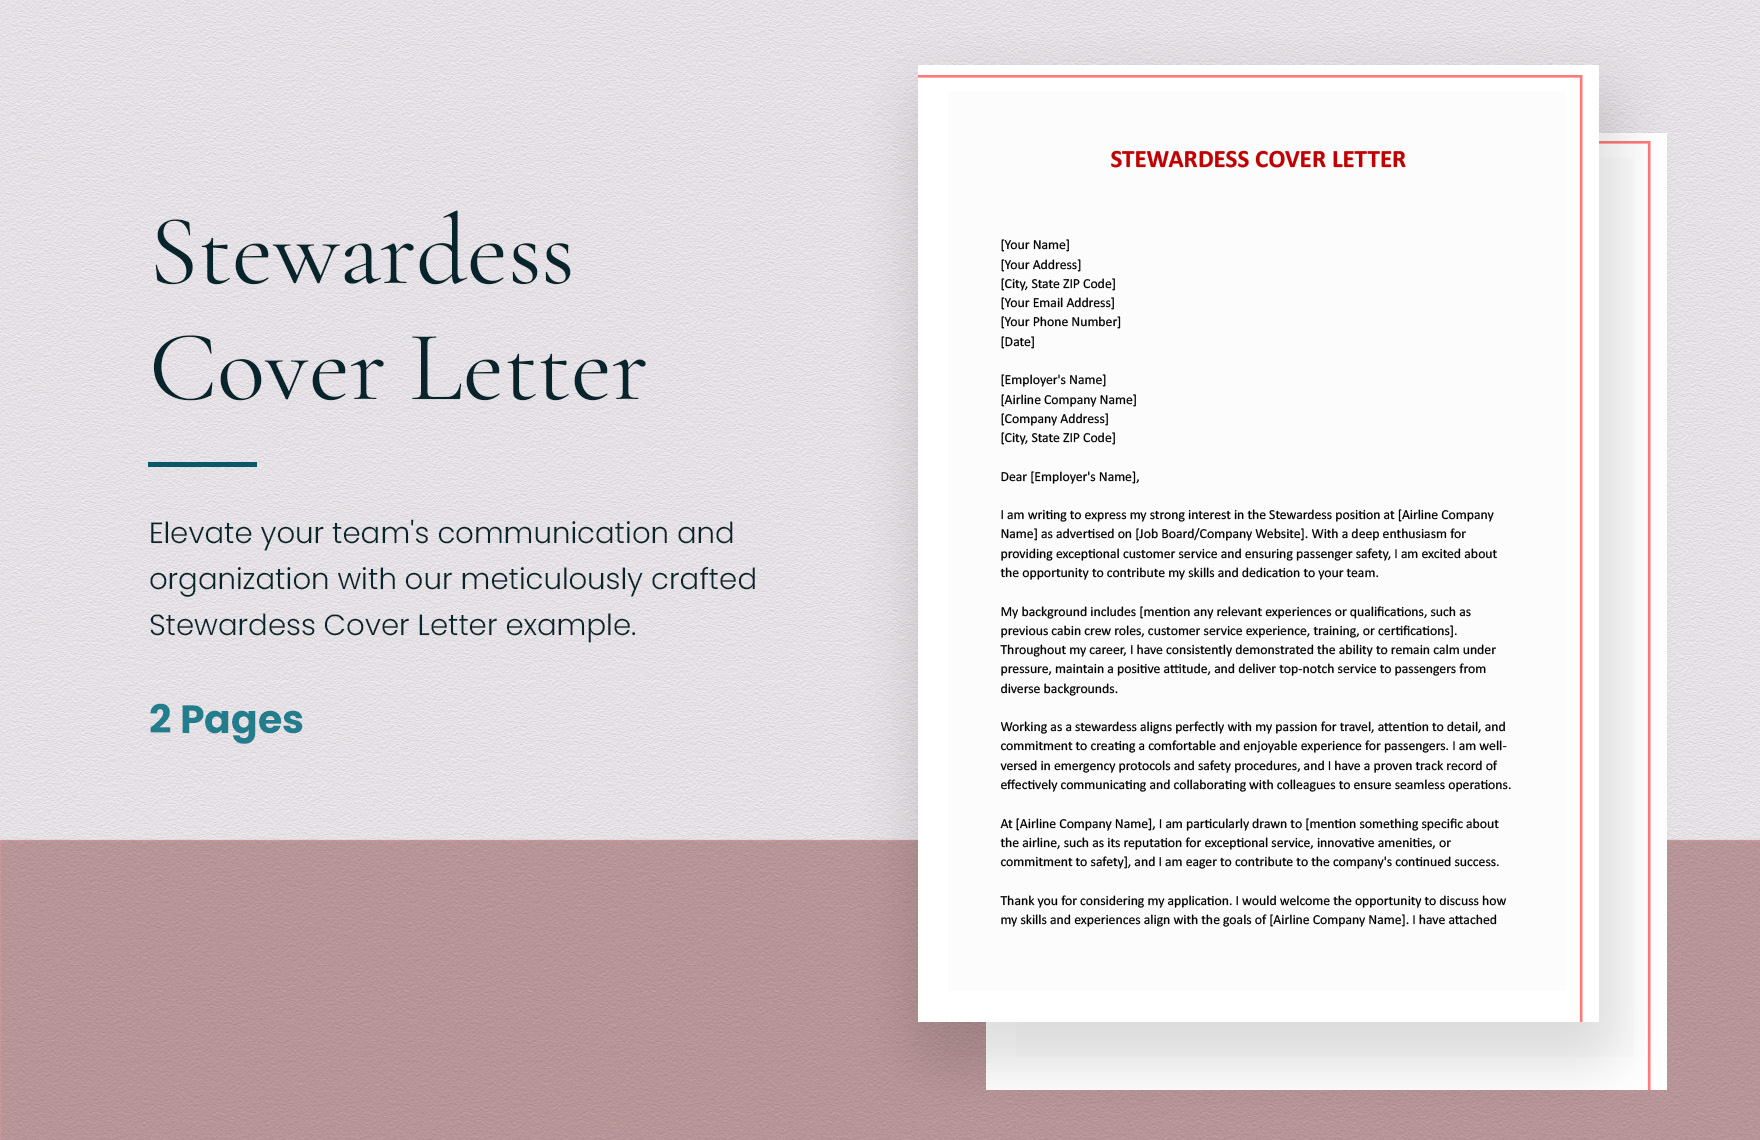 Stewardess Cover Letter in Word, Google Docs, Apple Pages